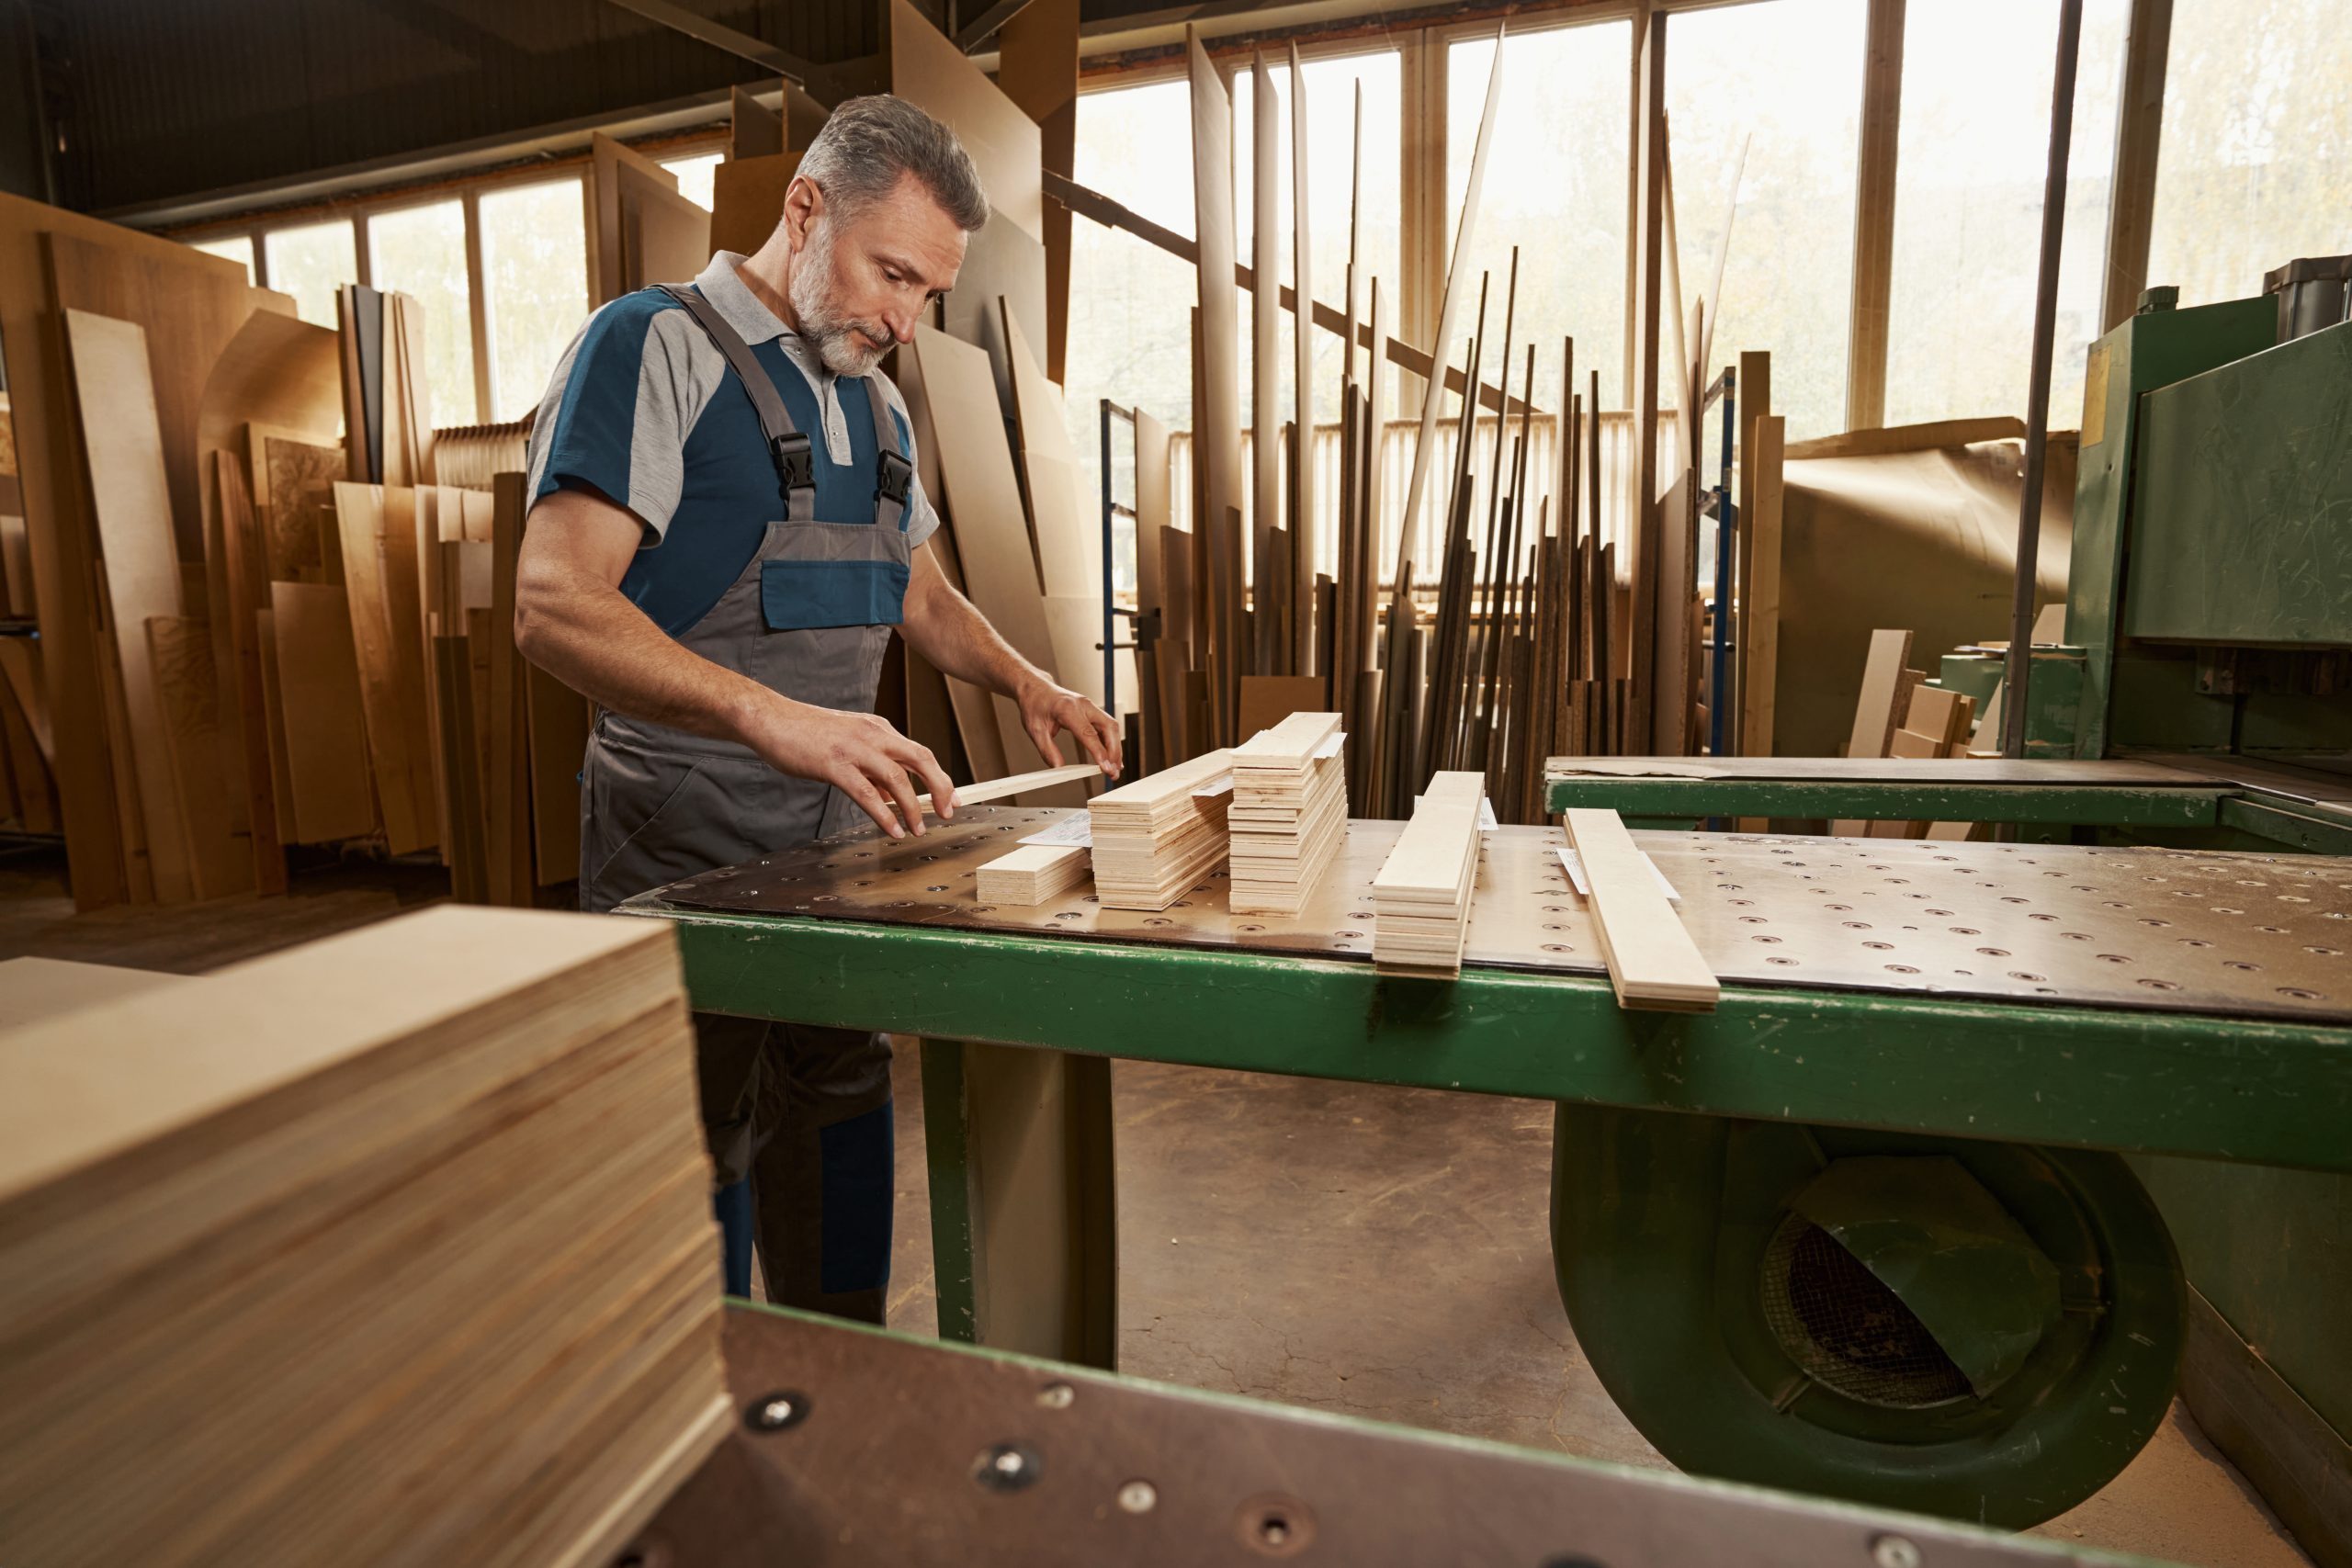 How Is Amish Furniture Made?